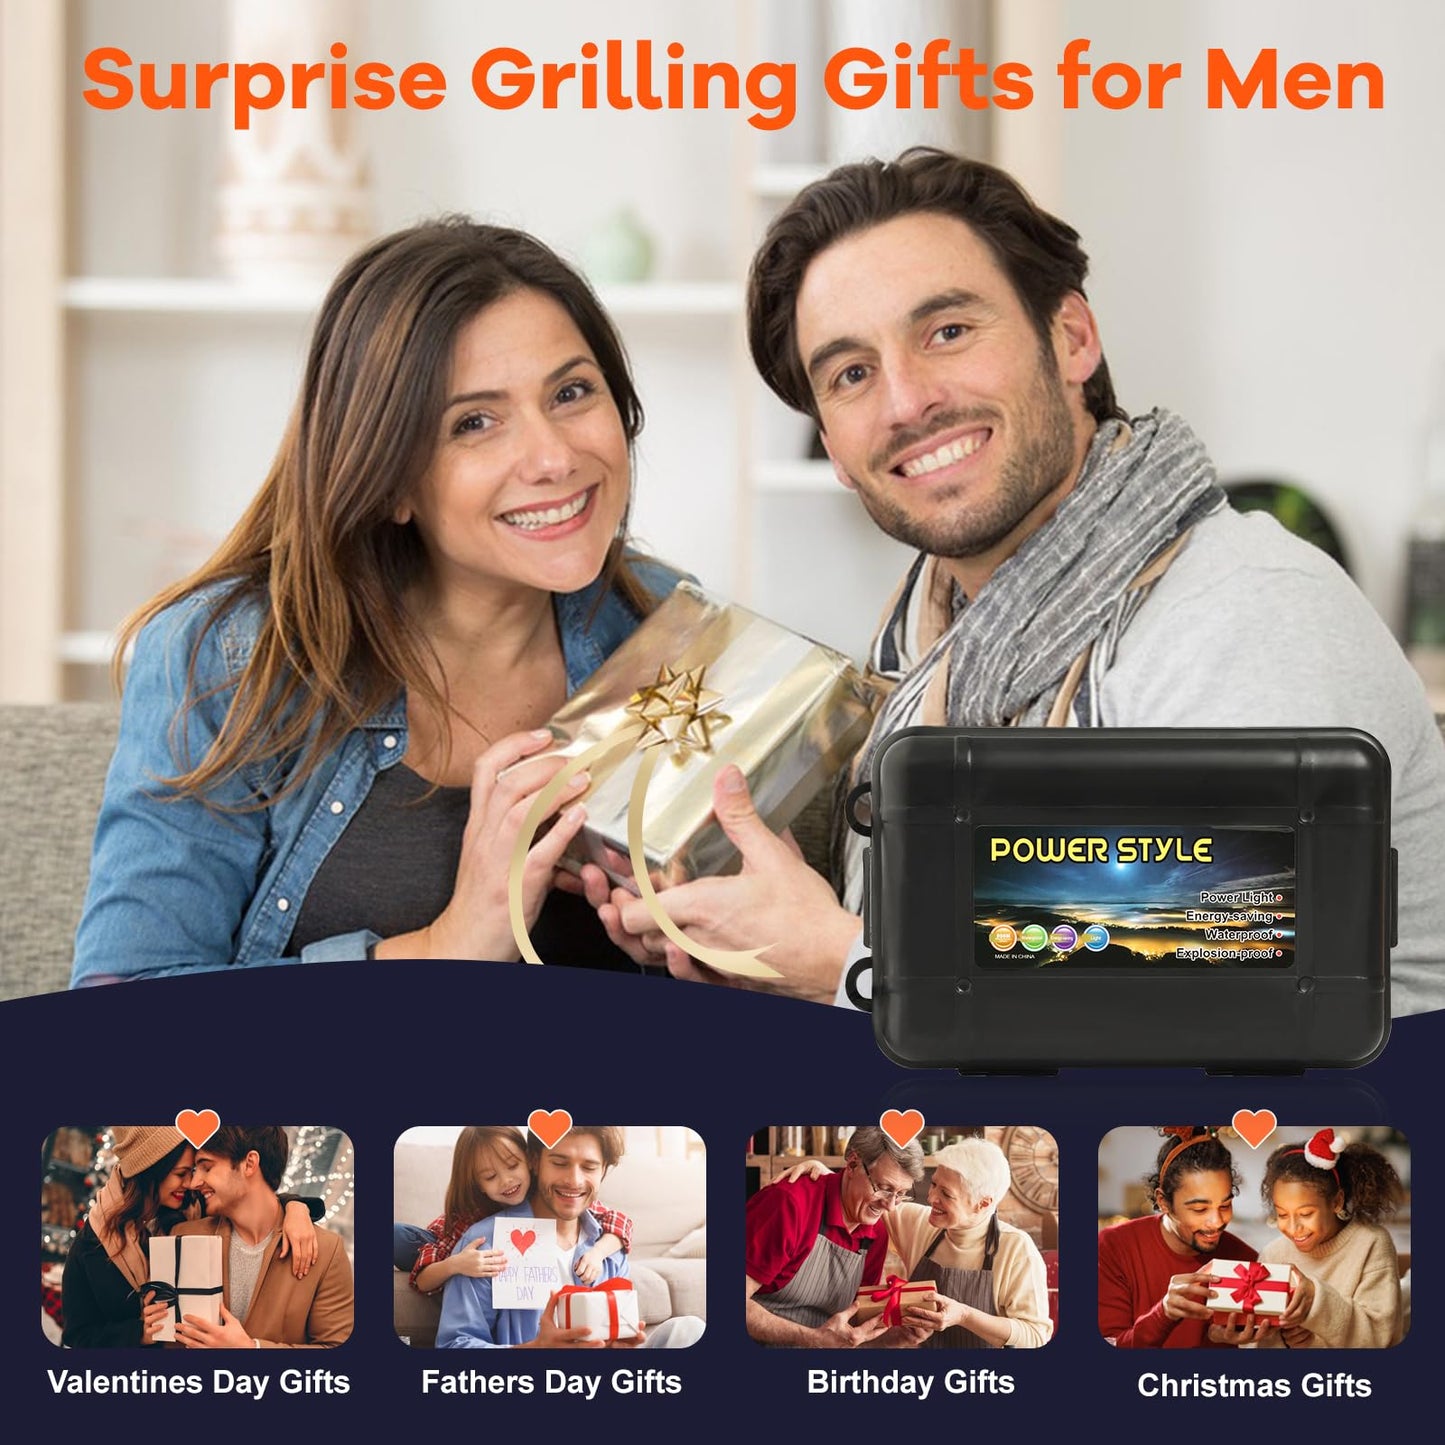 Grill Light BBQ Grilling Accessories - Unique Dad Gifts for Fathers Day, Funny Birthday Gifts for Men Husband Grandpa, Magnetic Bright LED Outdoor Grill Smoker Accessories, Batteries Included, 2 Pack